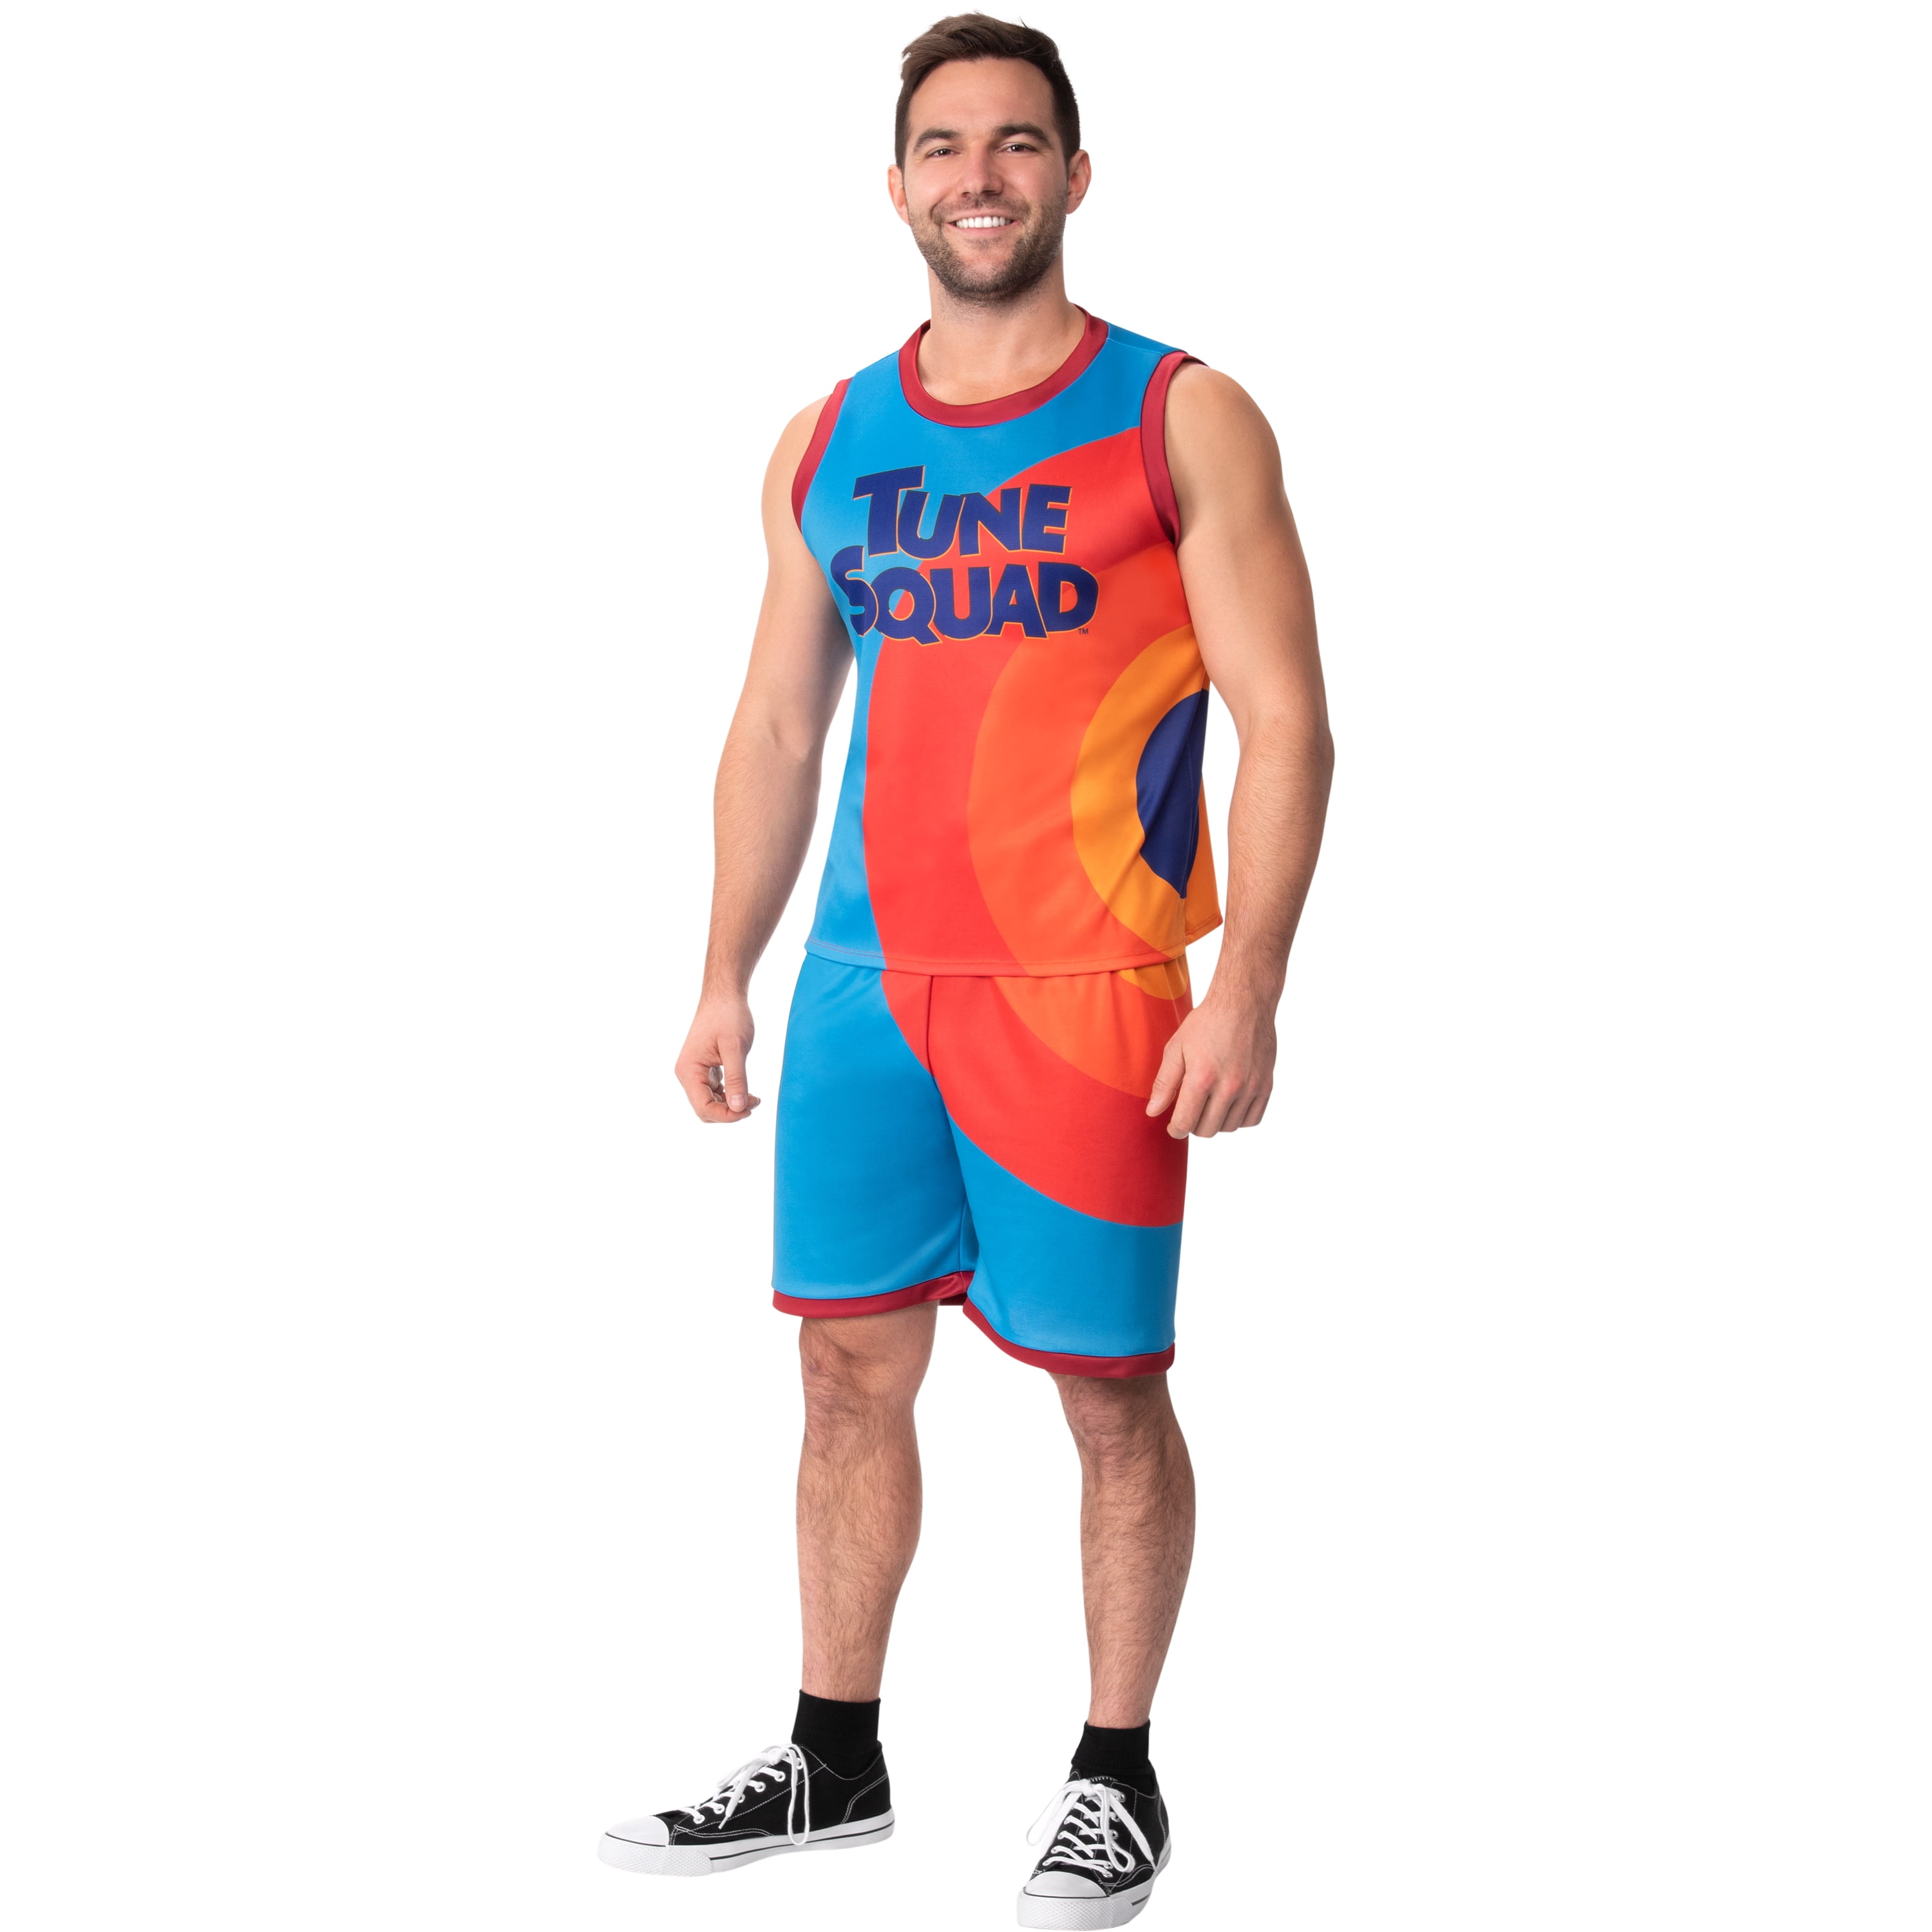 Tune Squad Space Jam 2 Costume For Adults